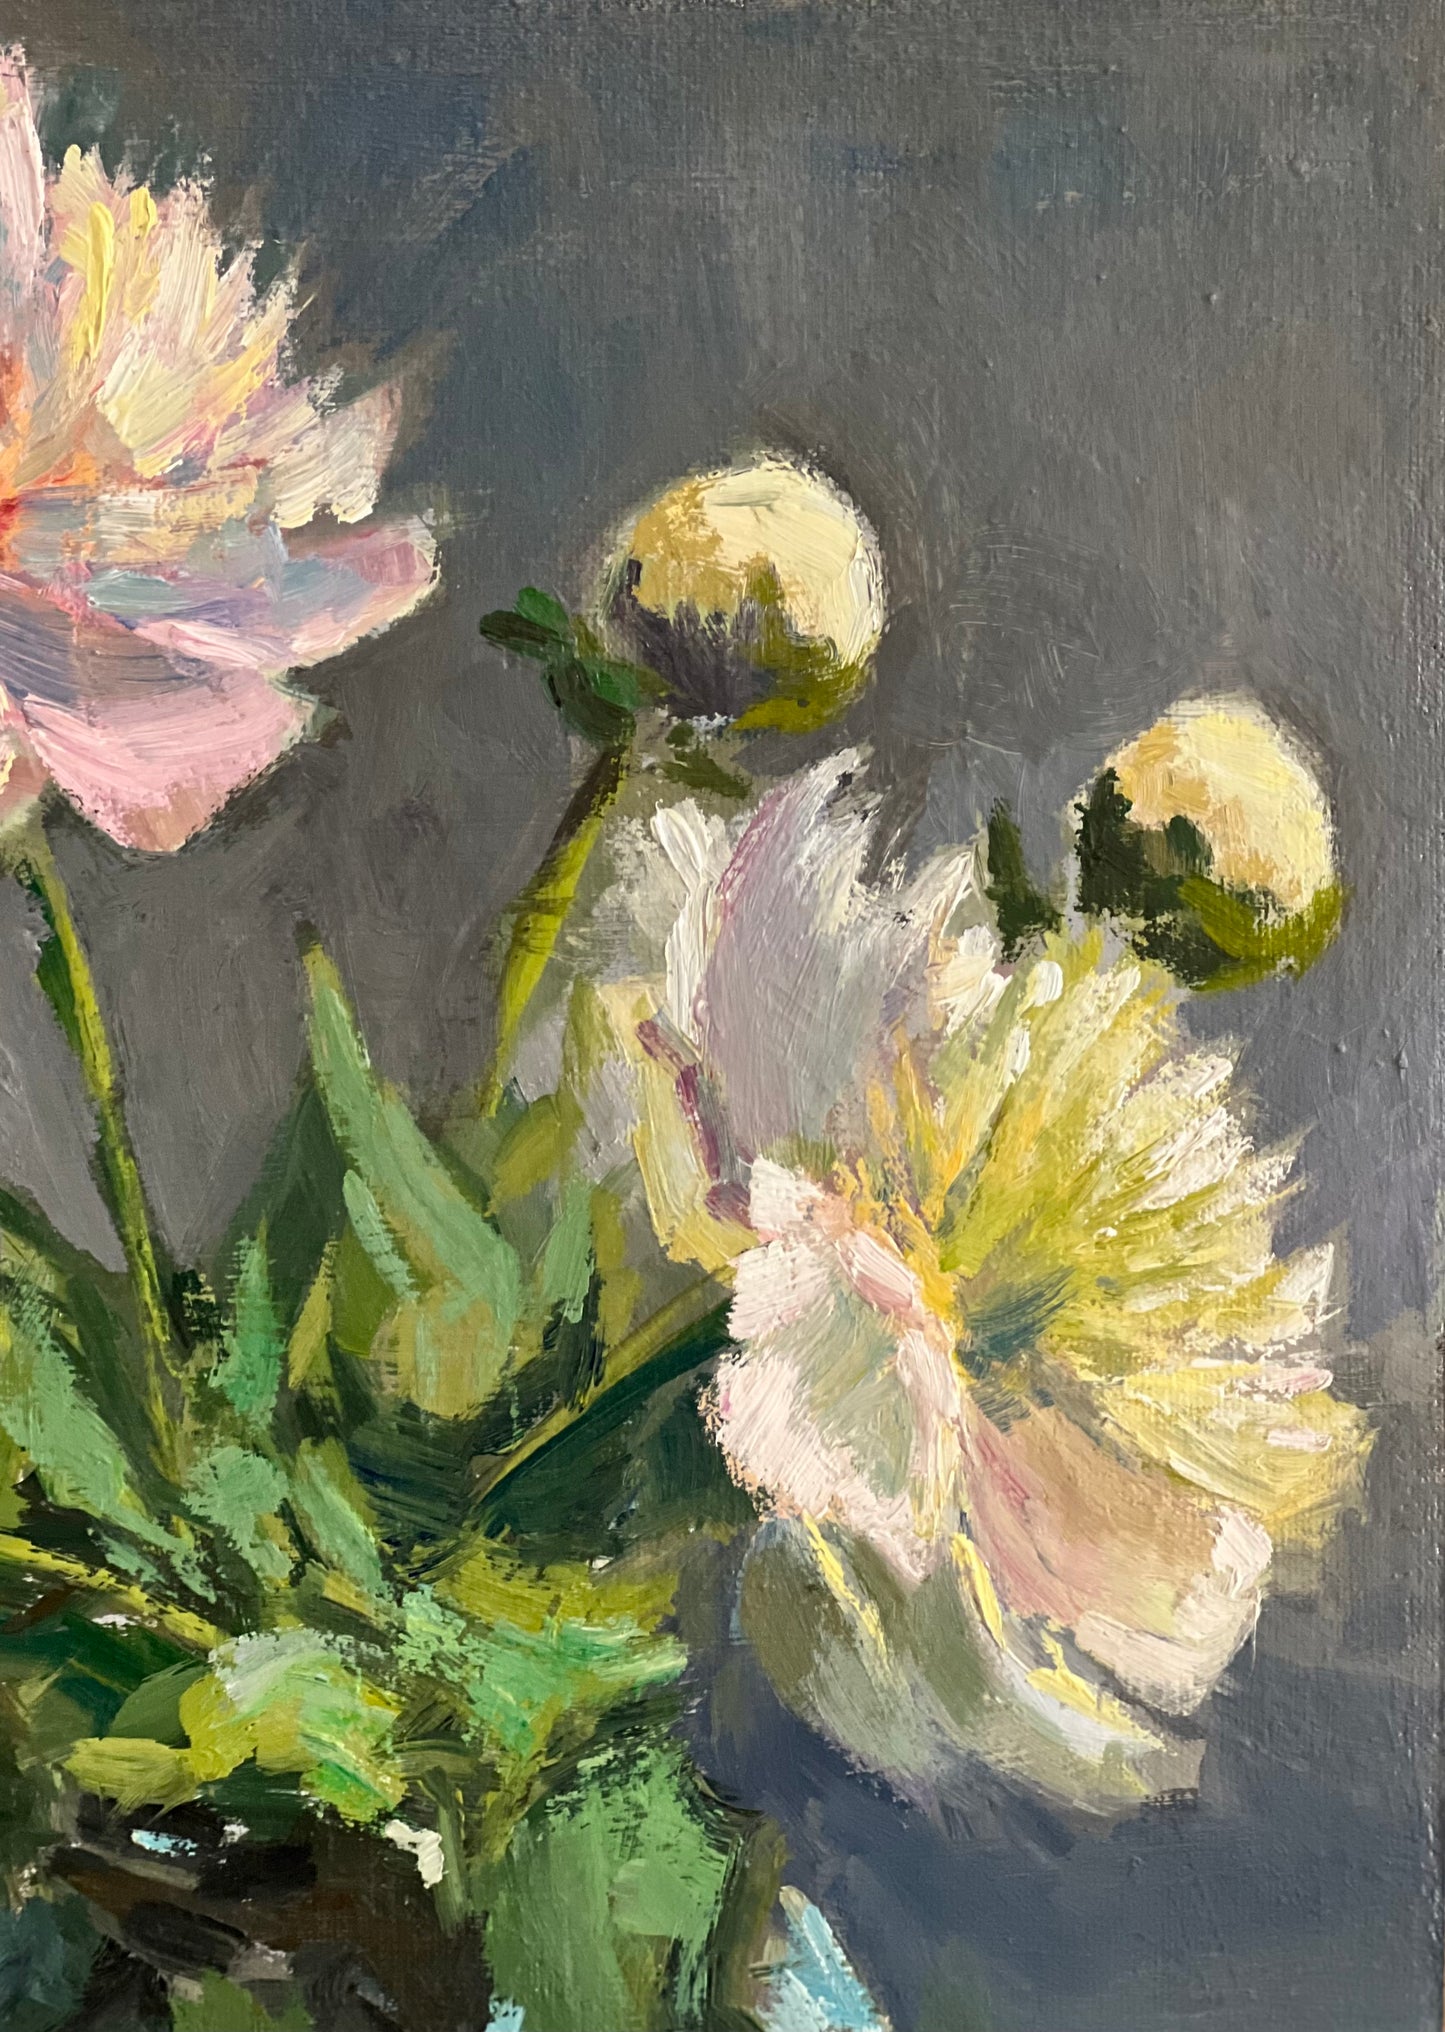 A royal bouquet!  - Large Original Oil Painting of Peony Flowers